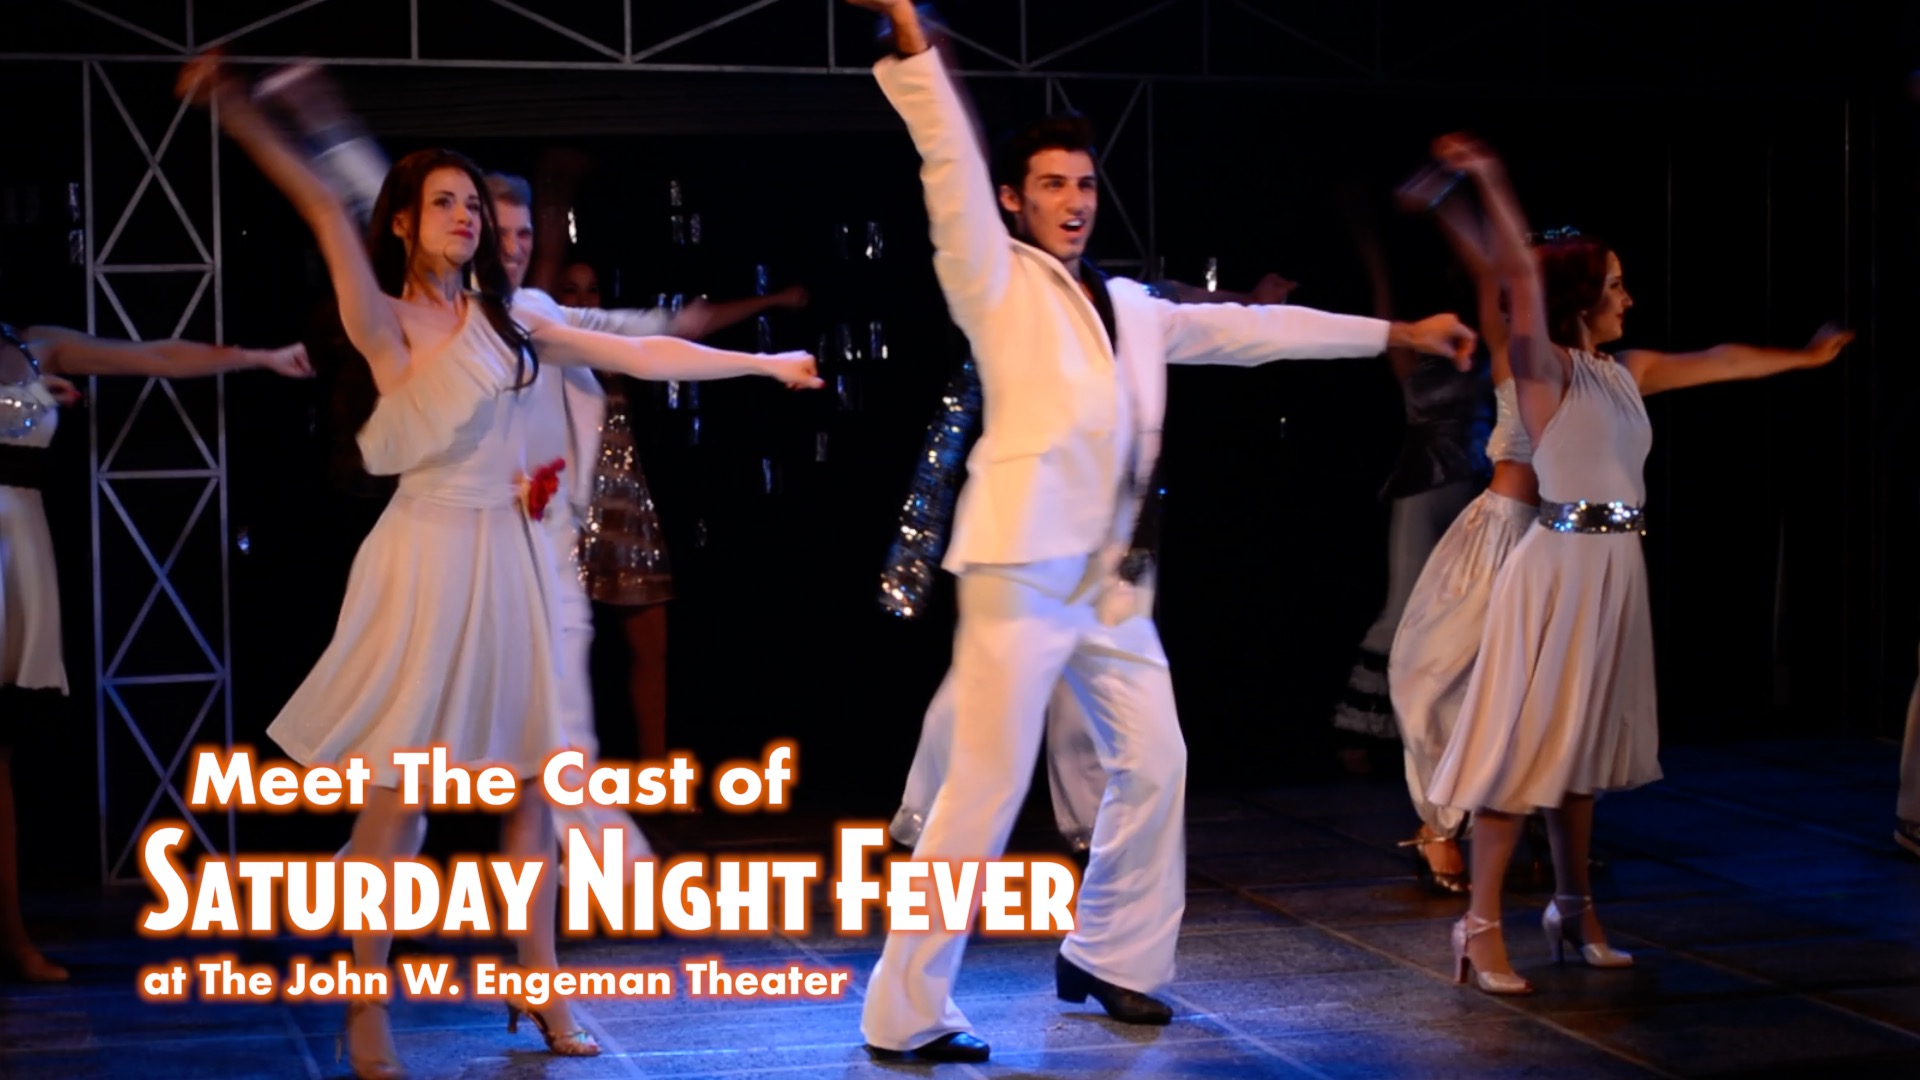 Meet The Cast of Saturday Night Fever at The John W. Engeman Theater